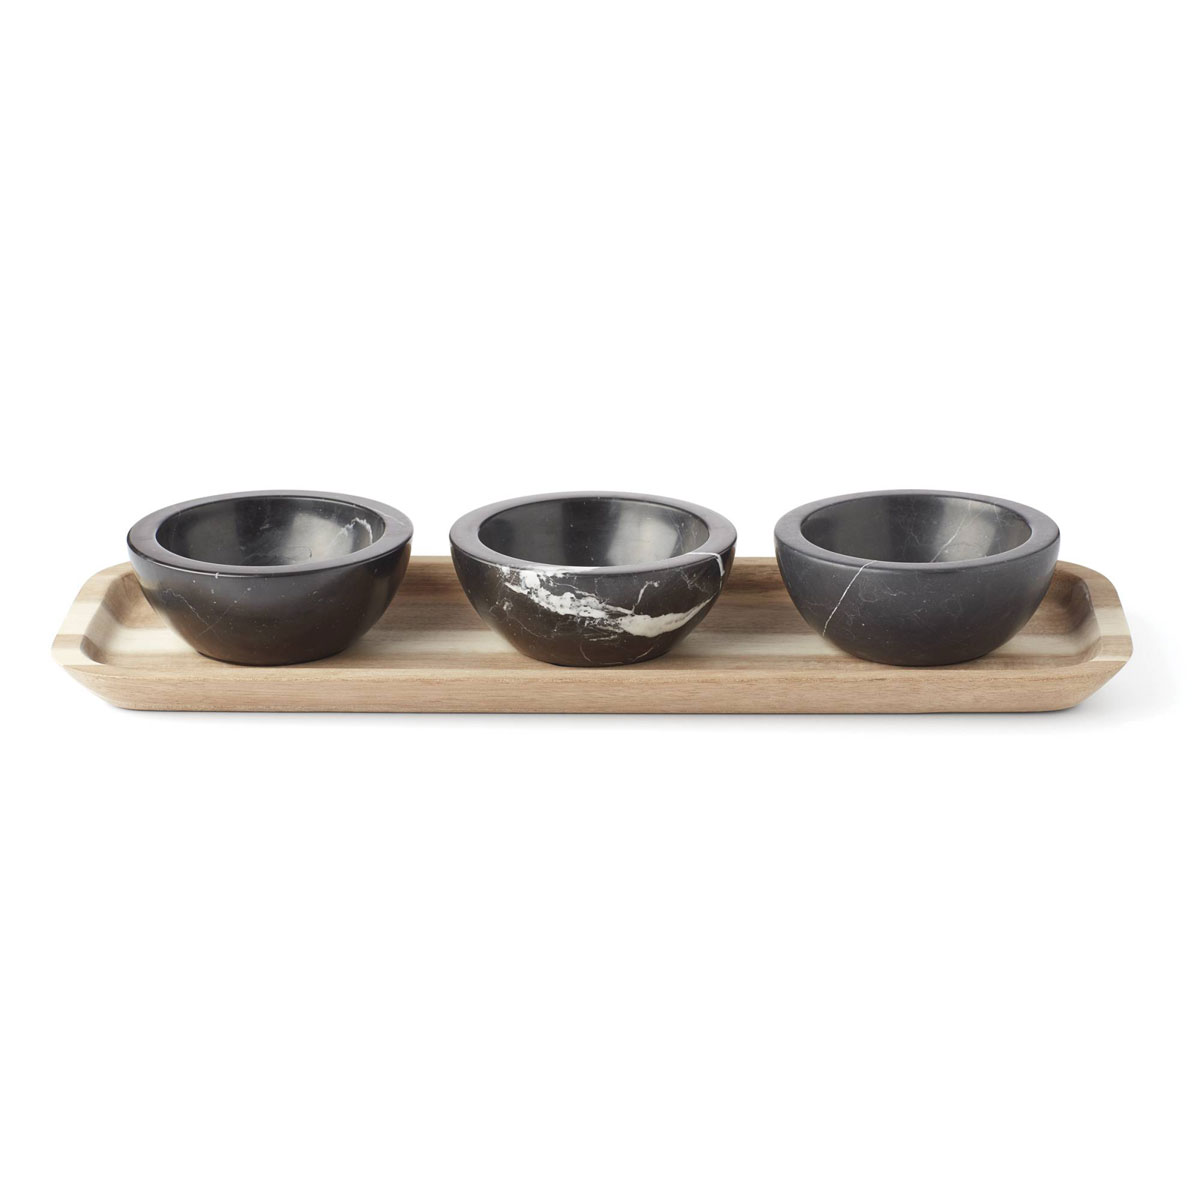 Lenox LX Collective Accessories Tray with 3 Dip Bowls